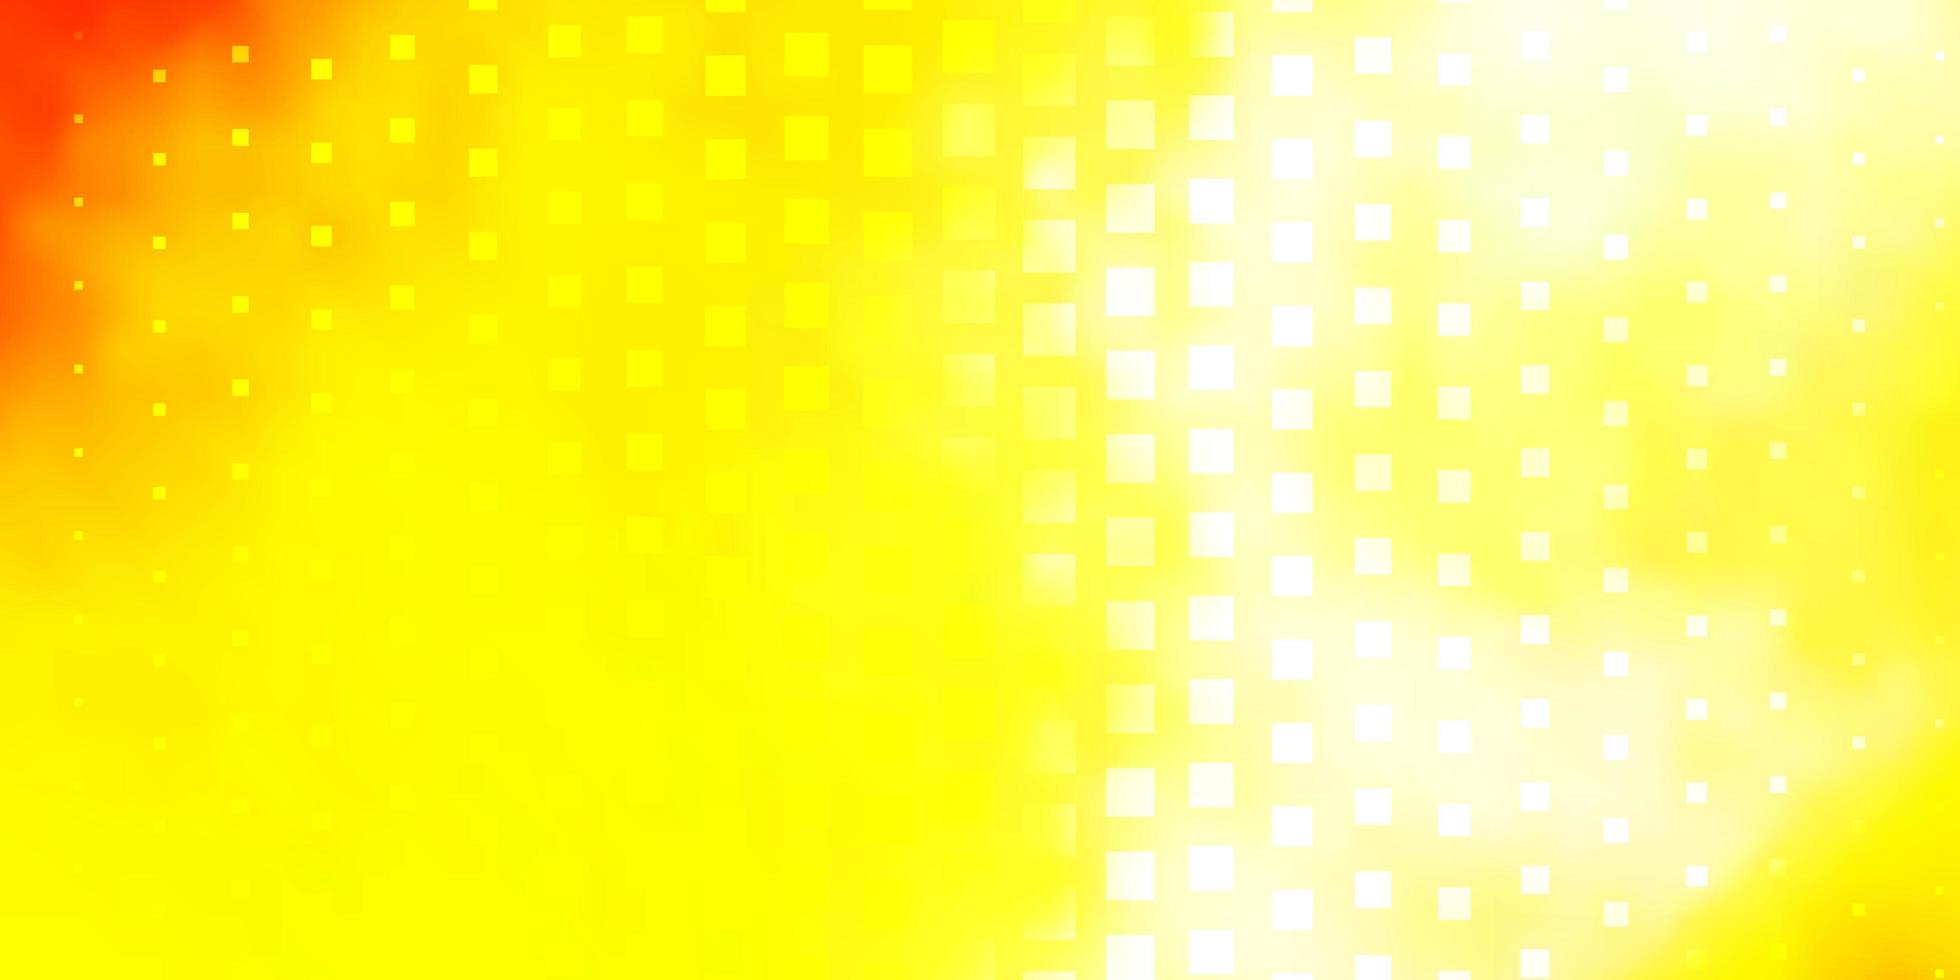 Dark Yellow vector backdrop with rectangles.